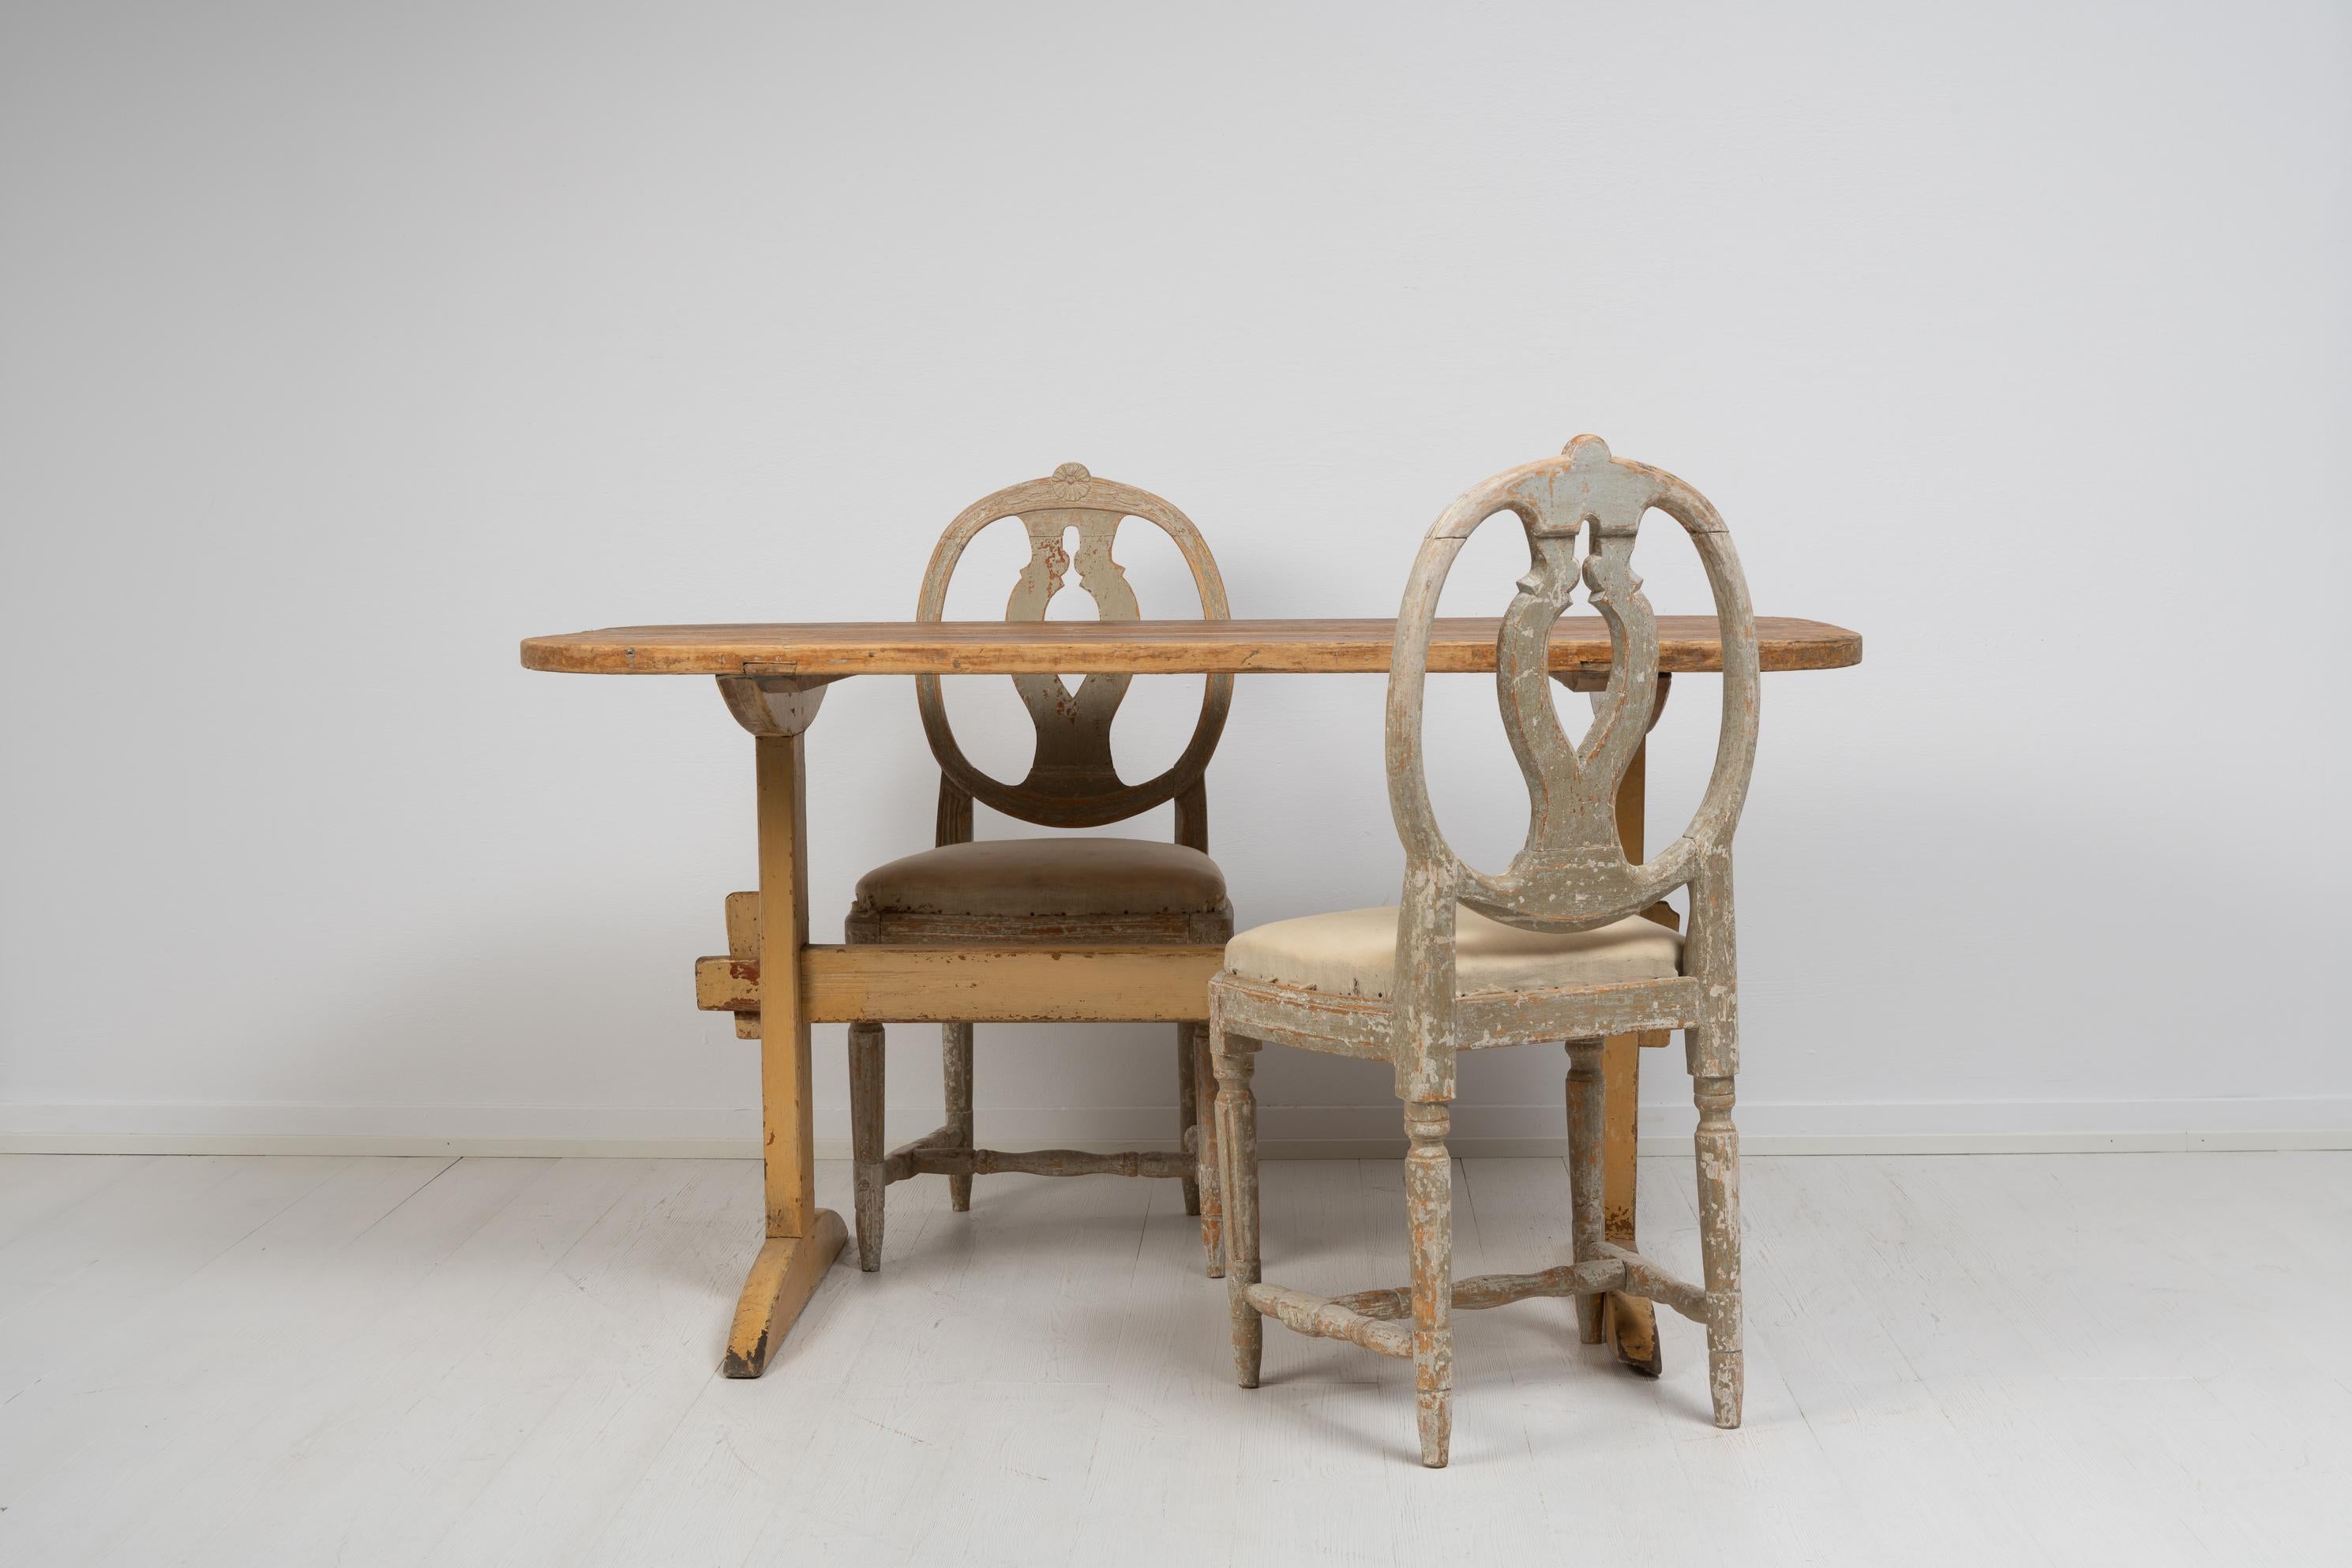 Swedish country home dining table in folk art. The table is well suited to hold two chairs on each of the longer sides. Made during the 1820s to 1830s the table is solid pine with a heavy table top. The table is a solid staple that has stood the